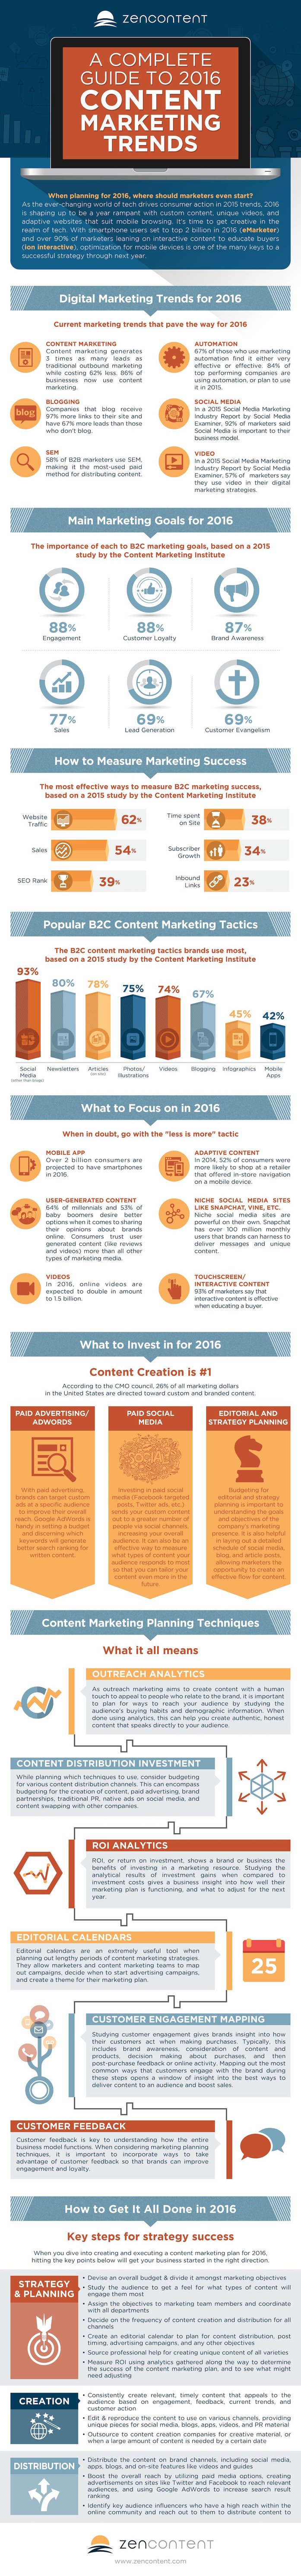 PRFINAL-A-Complete-Guide-to-2016-Content-Marketing-Trends-page-0011.jpg